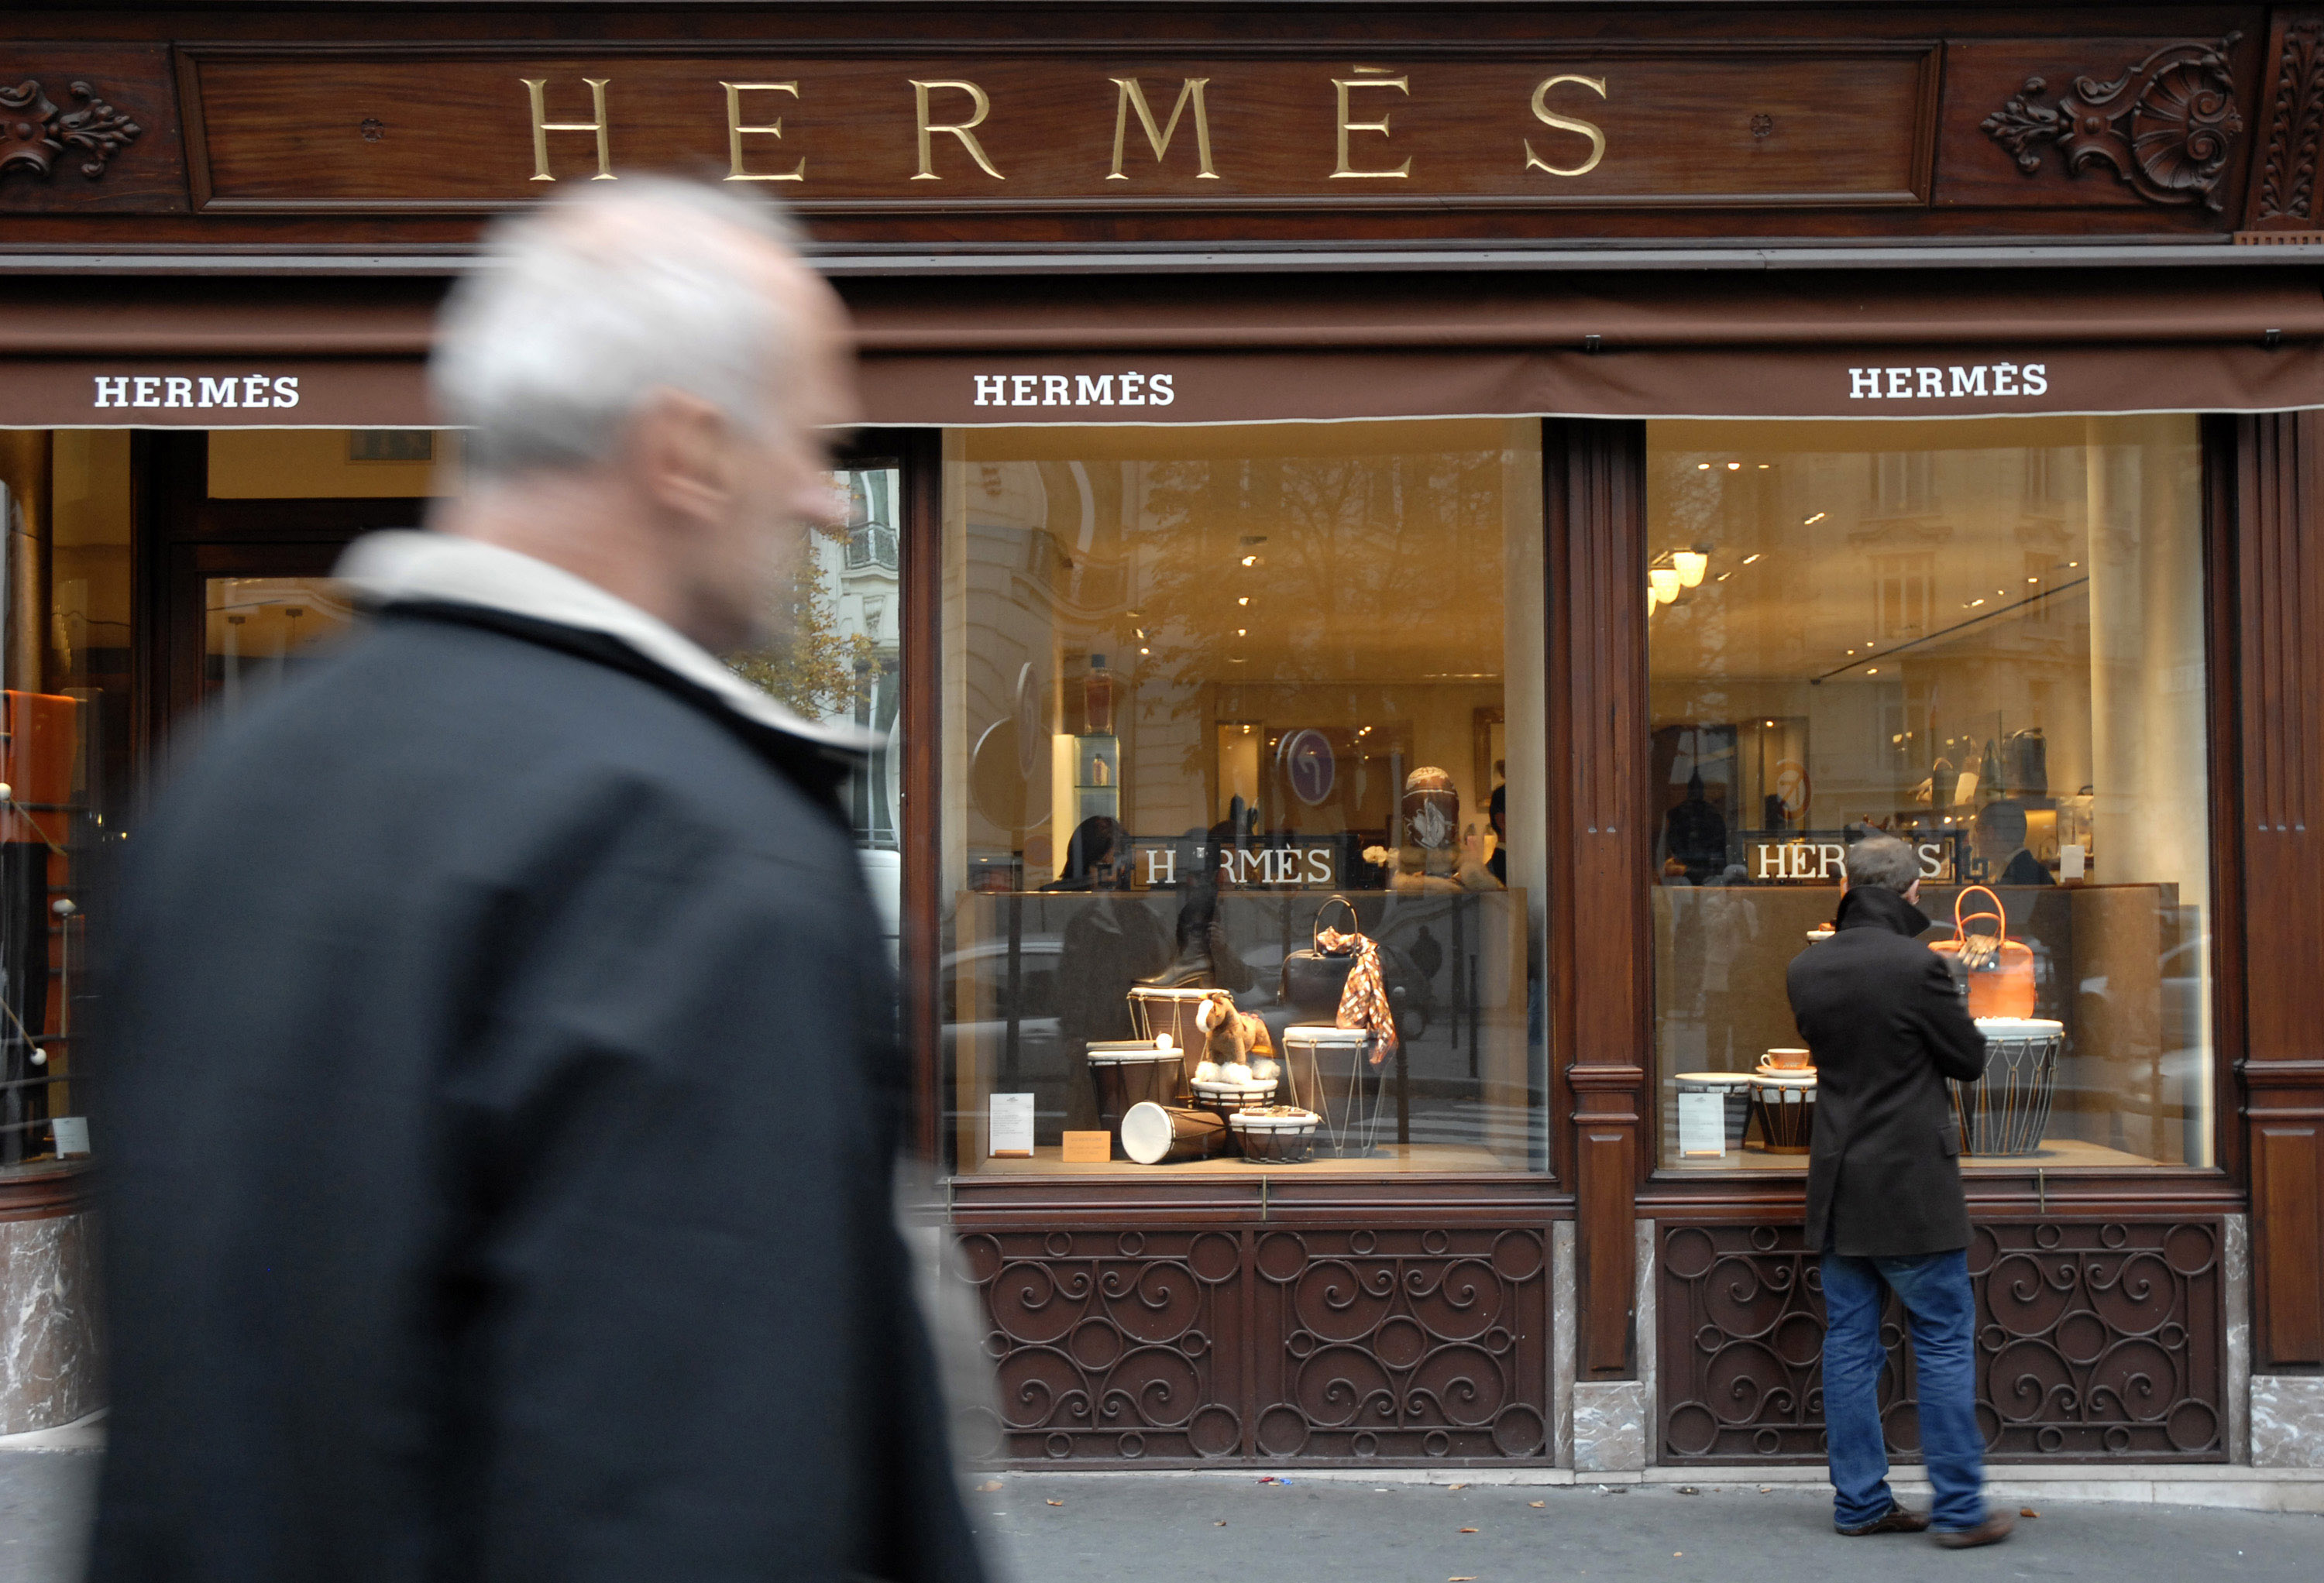 Hermes Quarterly Sales Rise 19% as Japan Leads Growth - Bloomberg